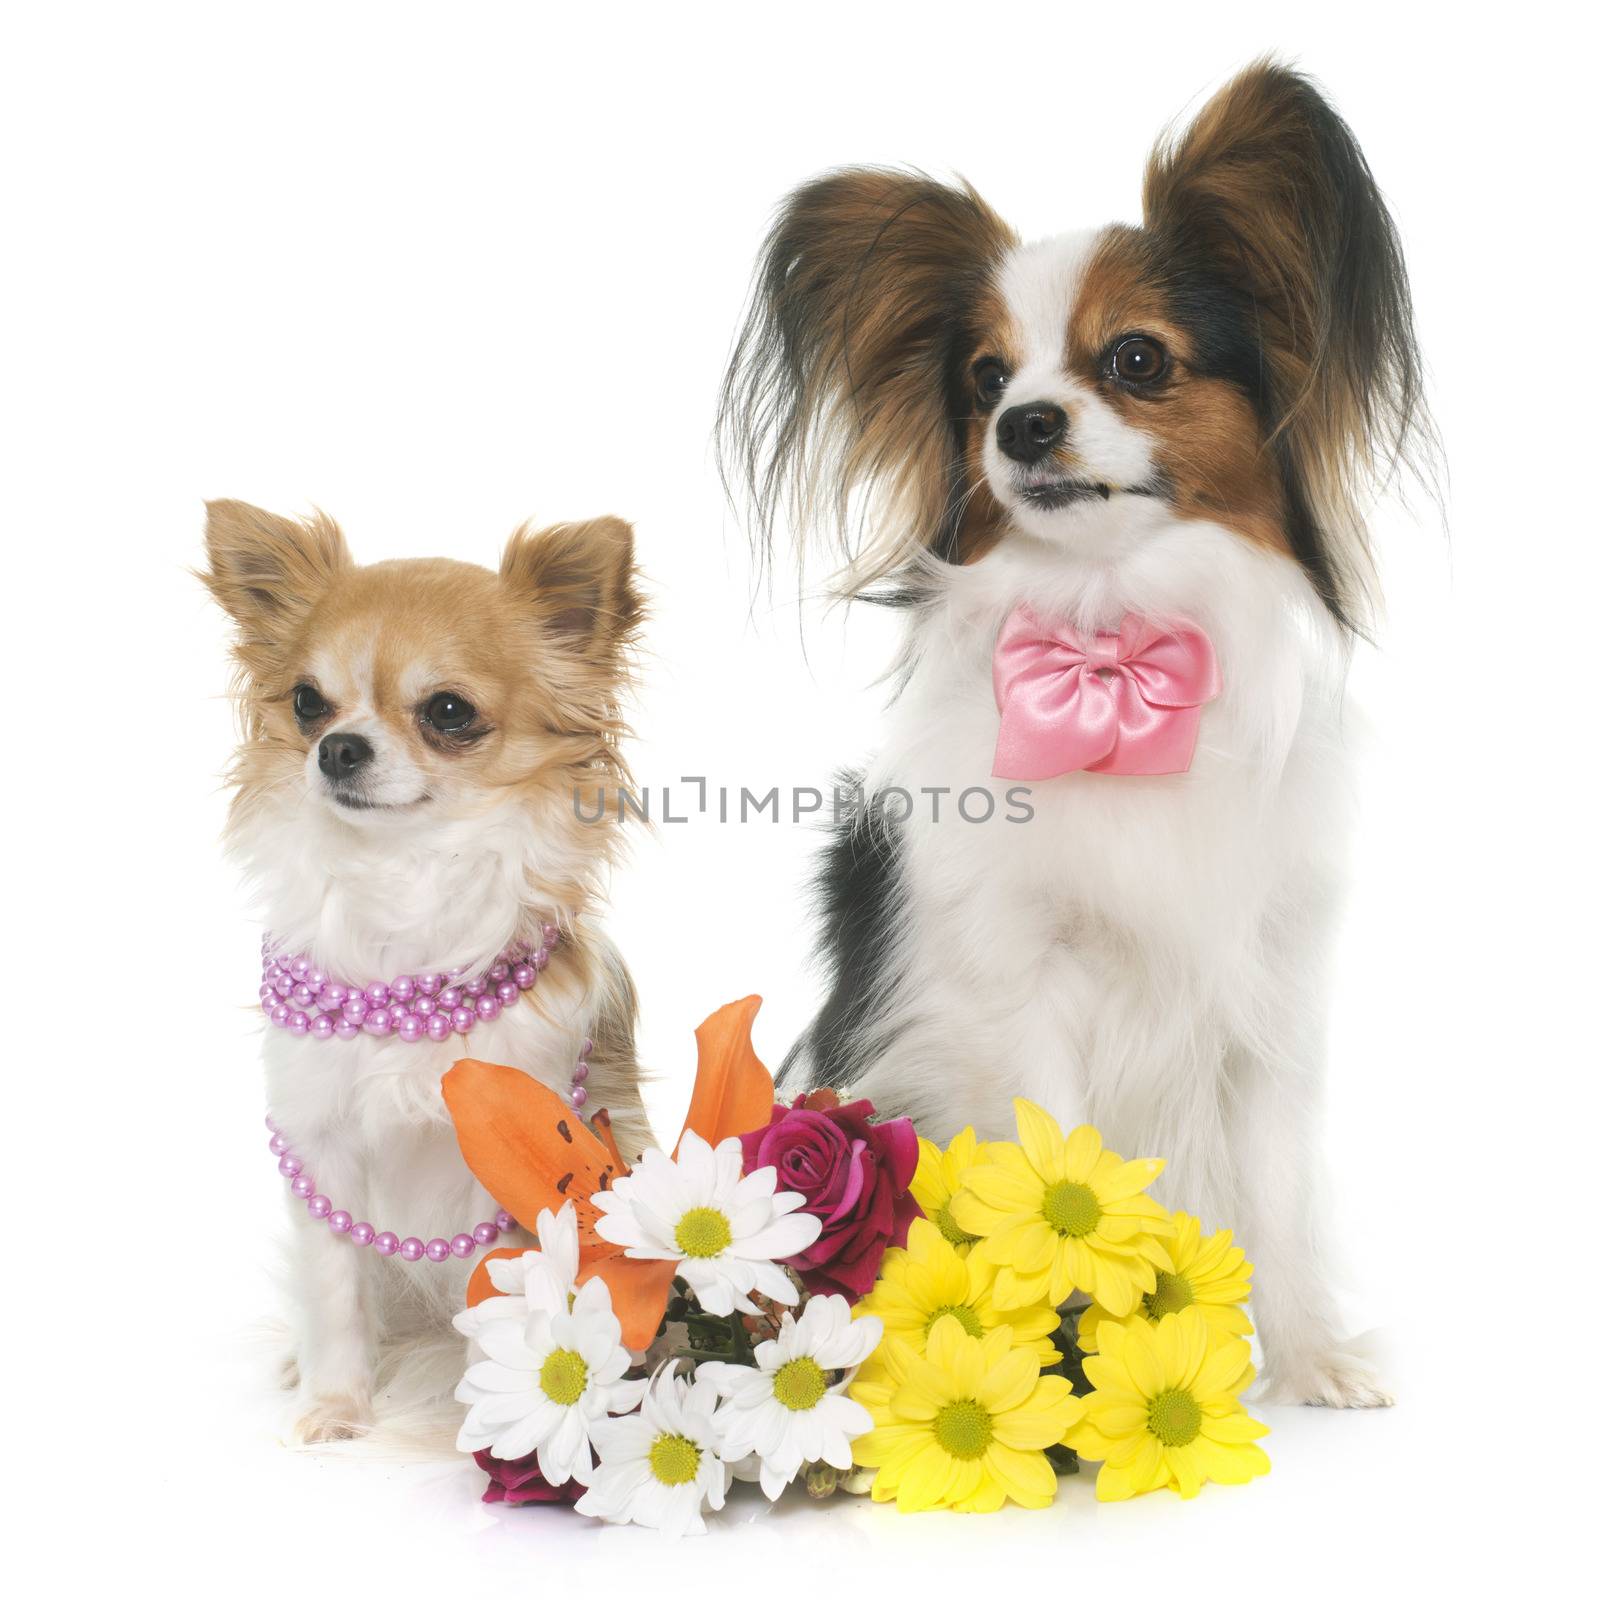 papillon dog and chihuahua by cynoclub